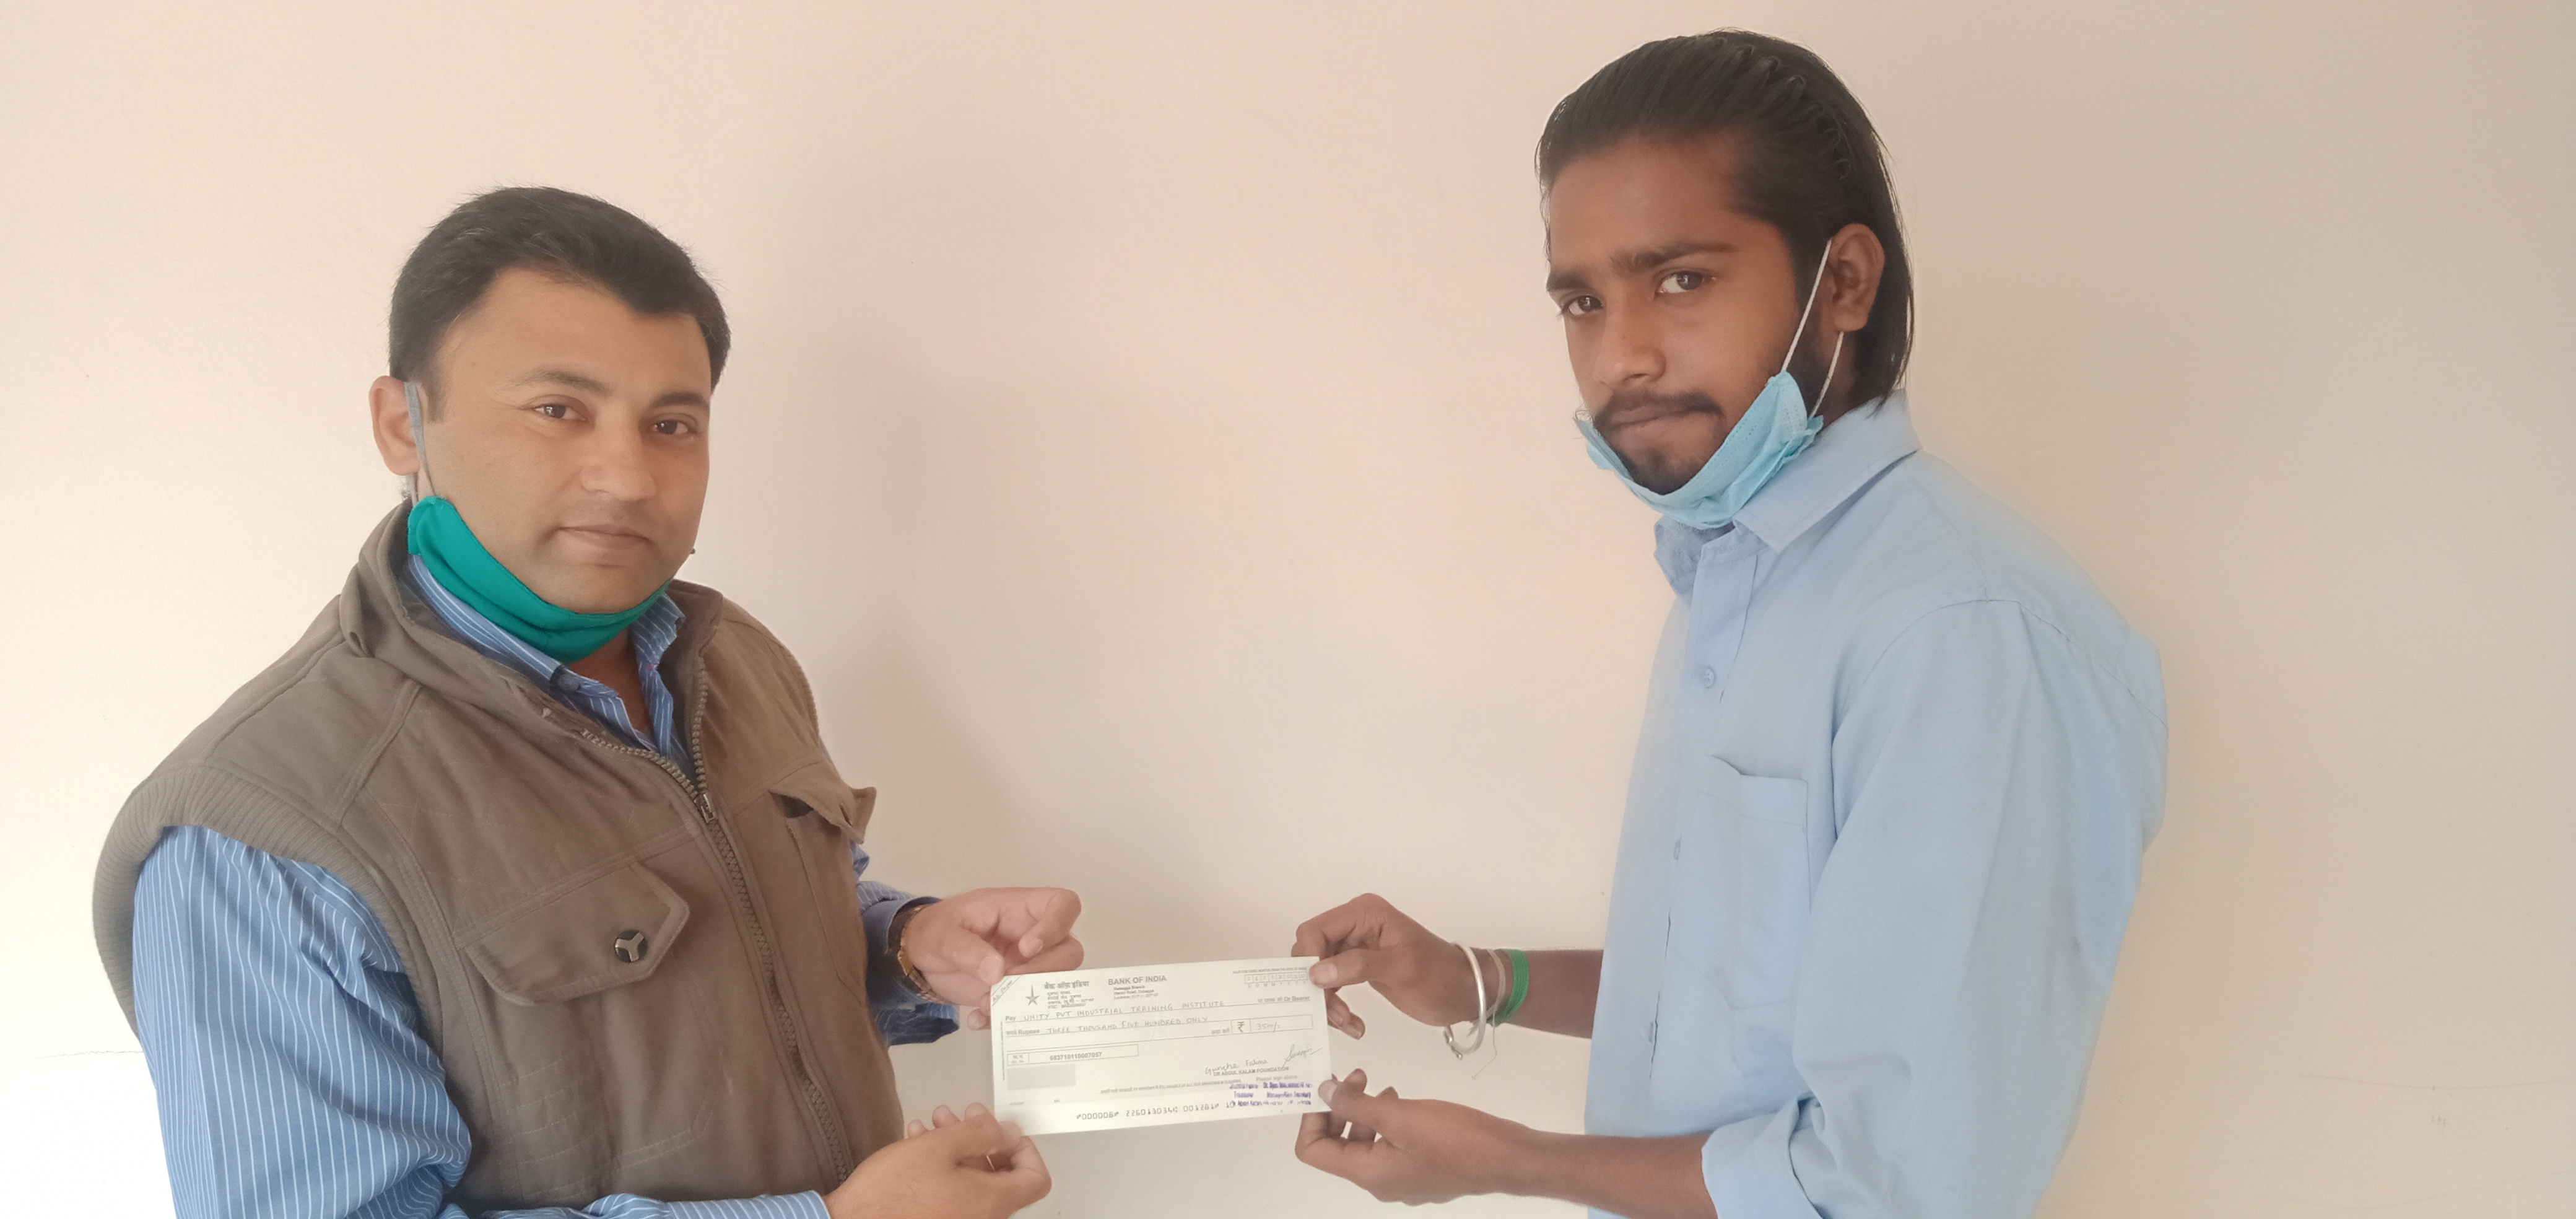 Giving Cheque for Education to Needy Students for further studies